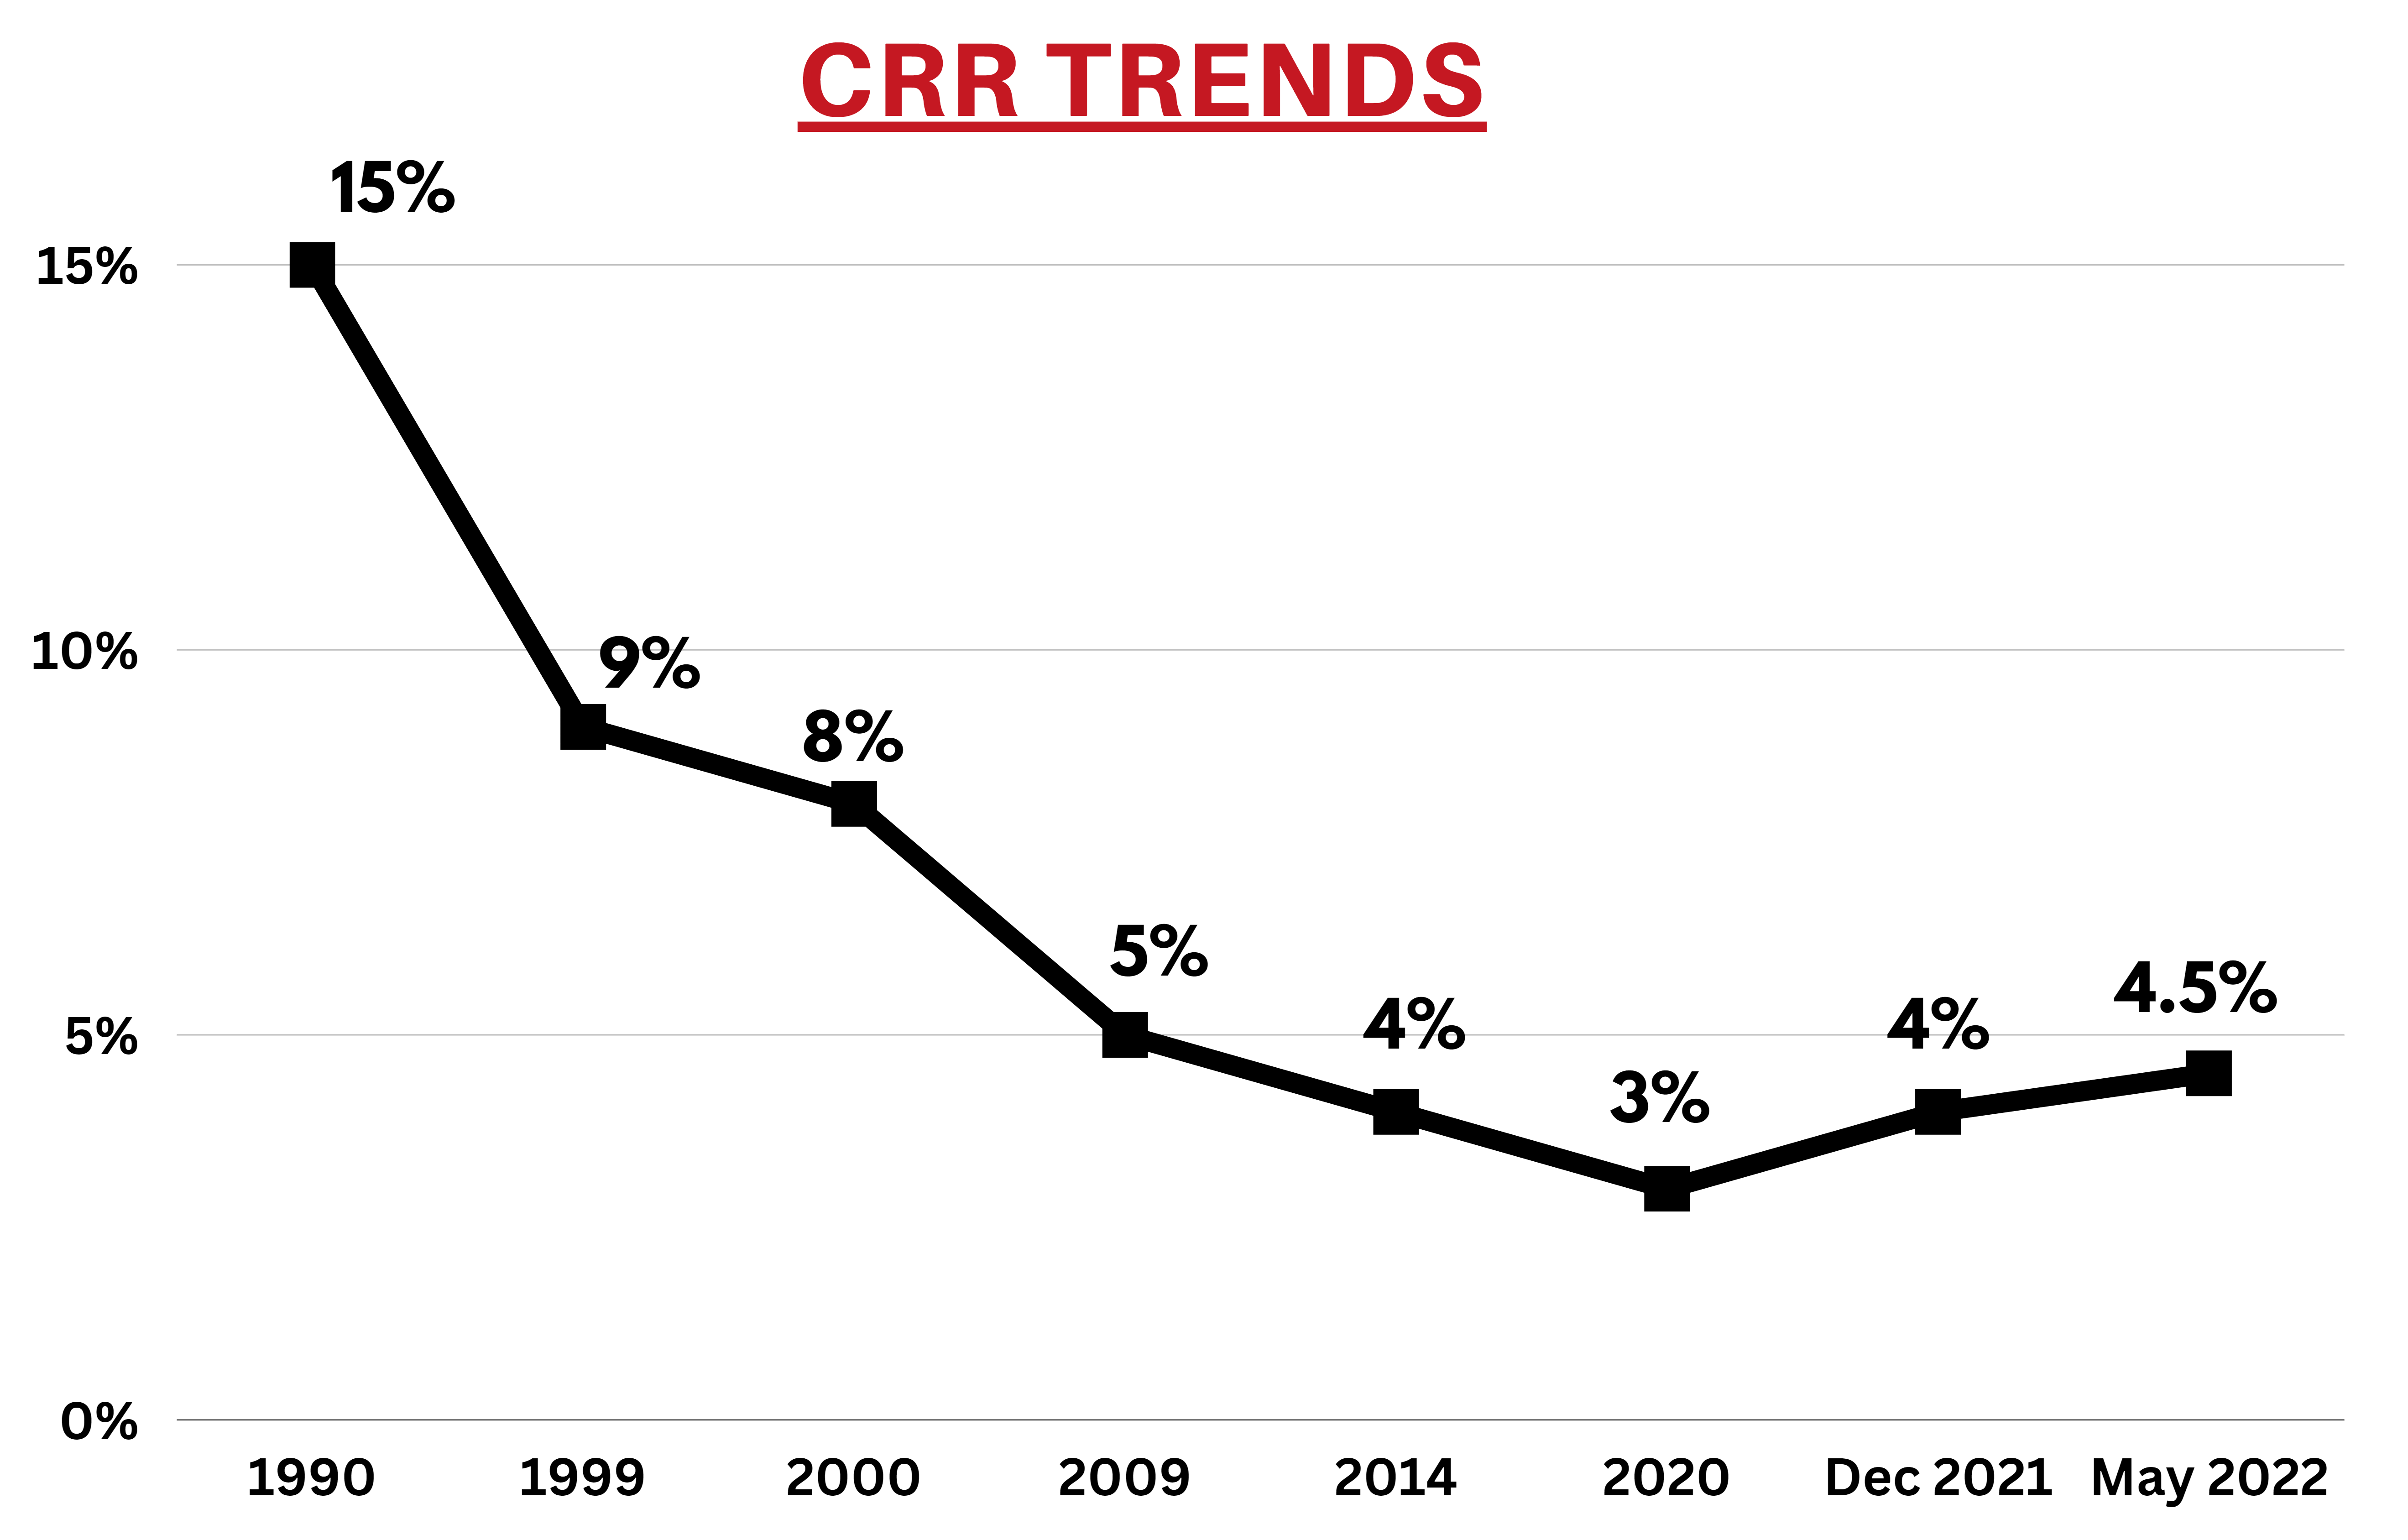 CRR Trends 